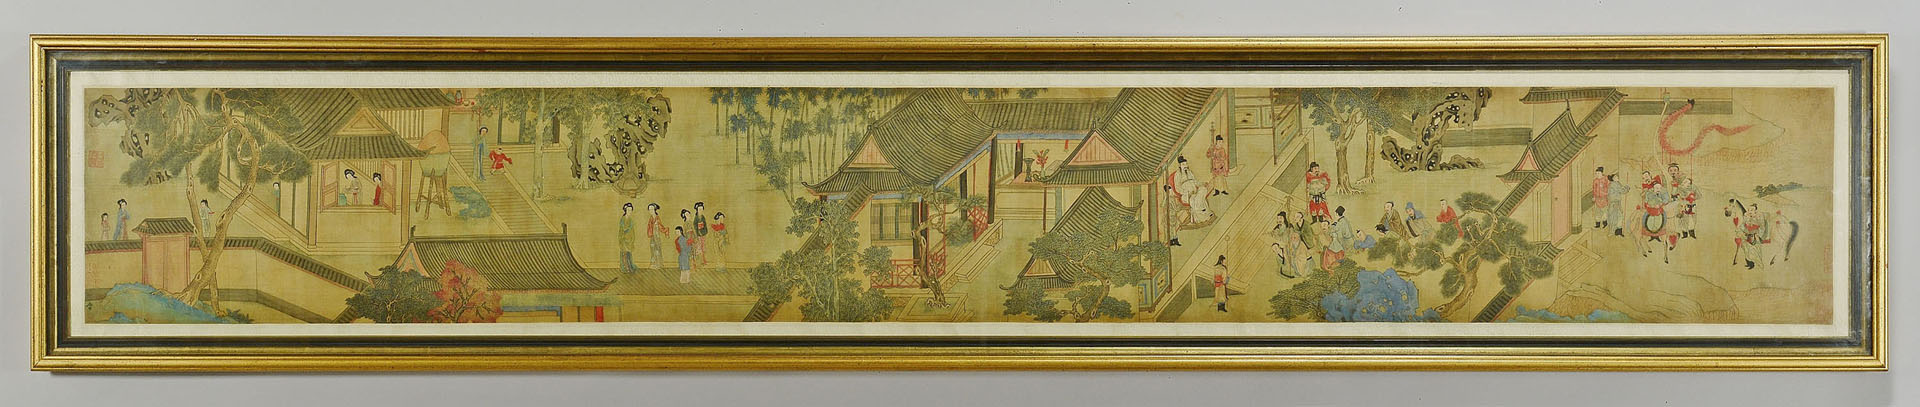 Lot 7: Classical Chinese Handscroll on Silk